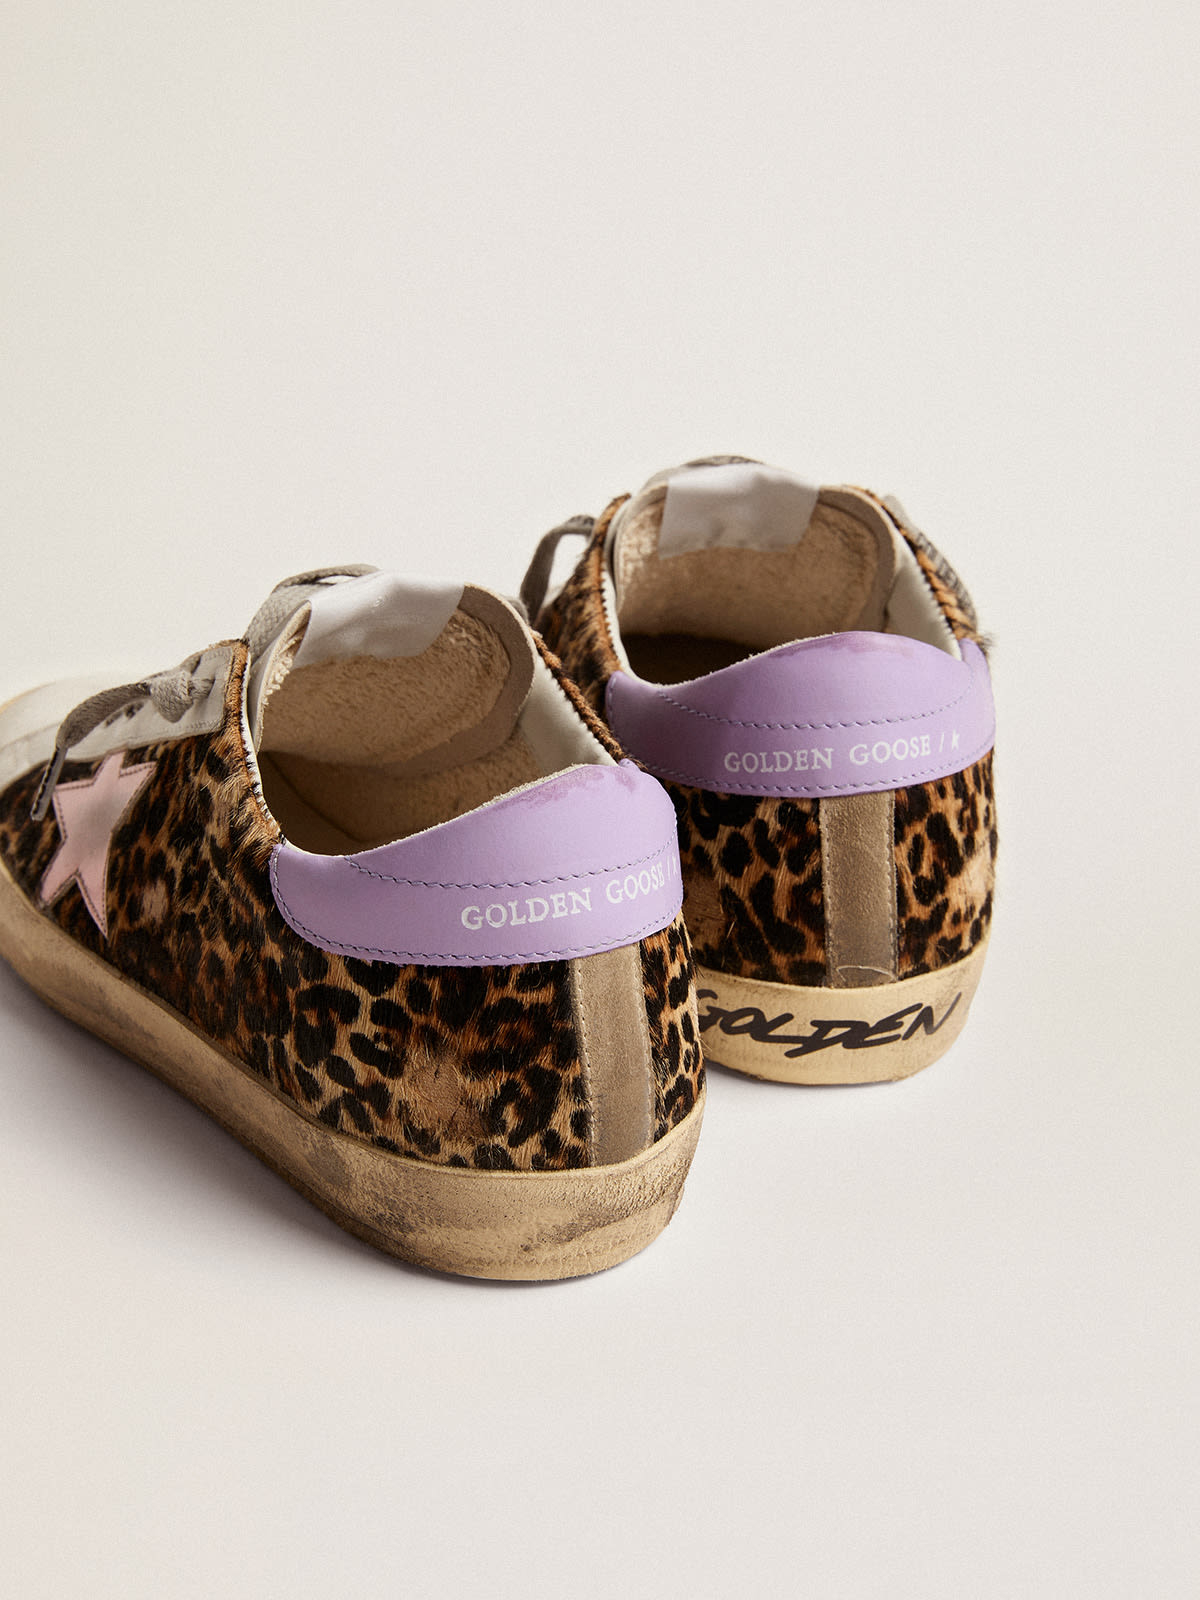 Golden Goose - Super-Star LTD sneakers in leopard-print pony skin with salmon-colored laminated leather star and purple leather heel tab in 